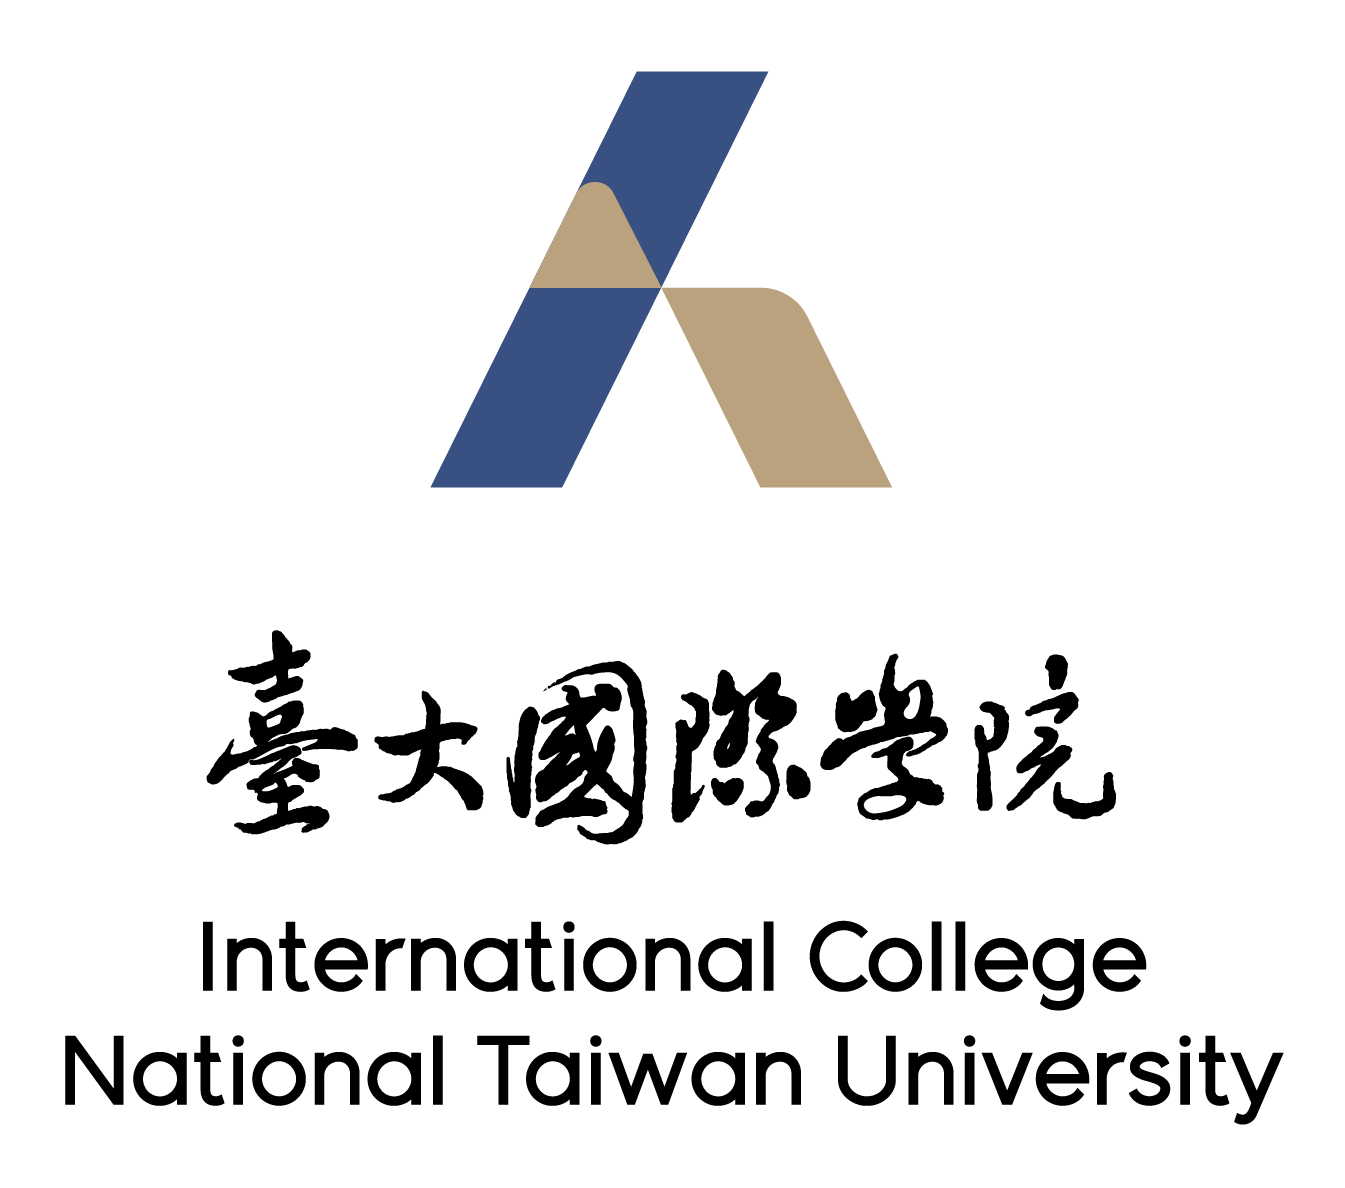 LOGO-18.png picture